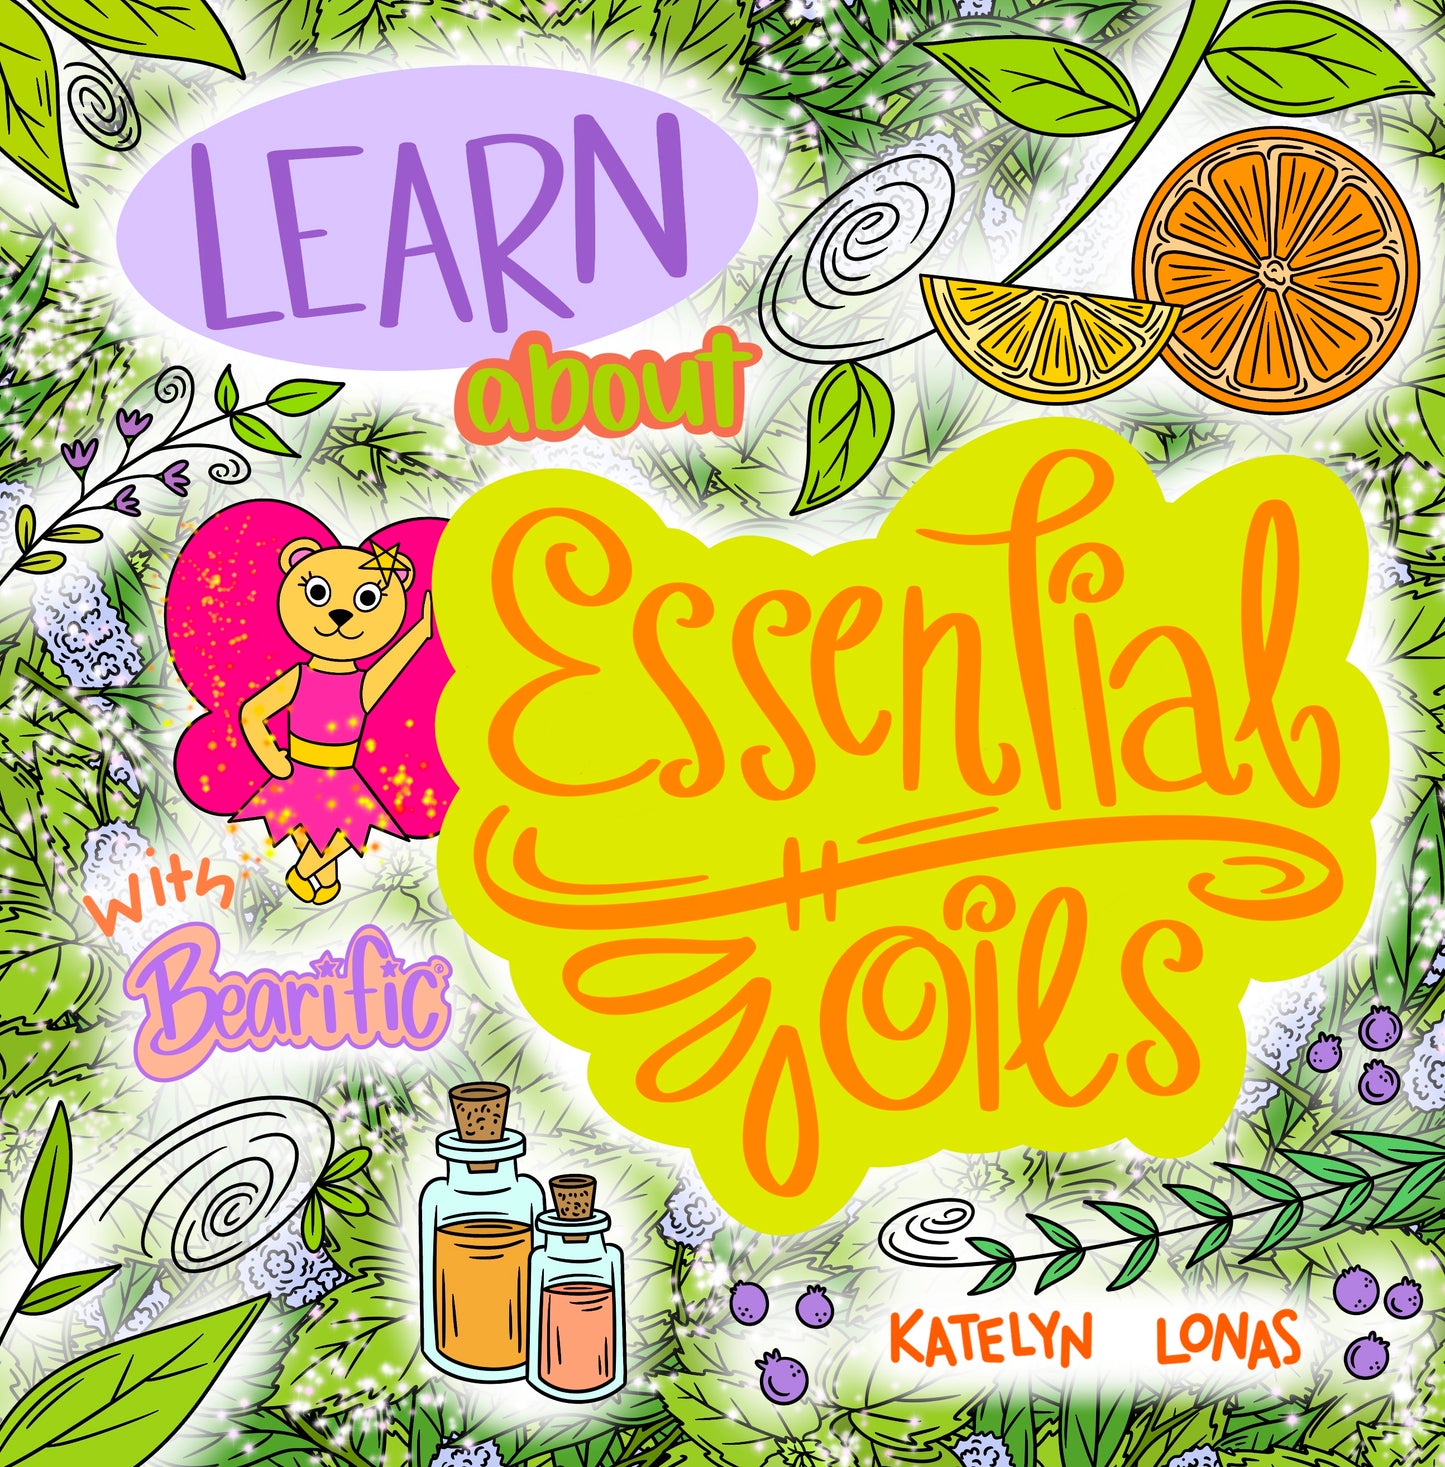 Learn about Essential Oils with Bearific